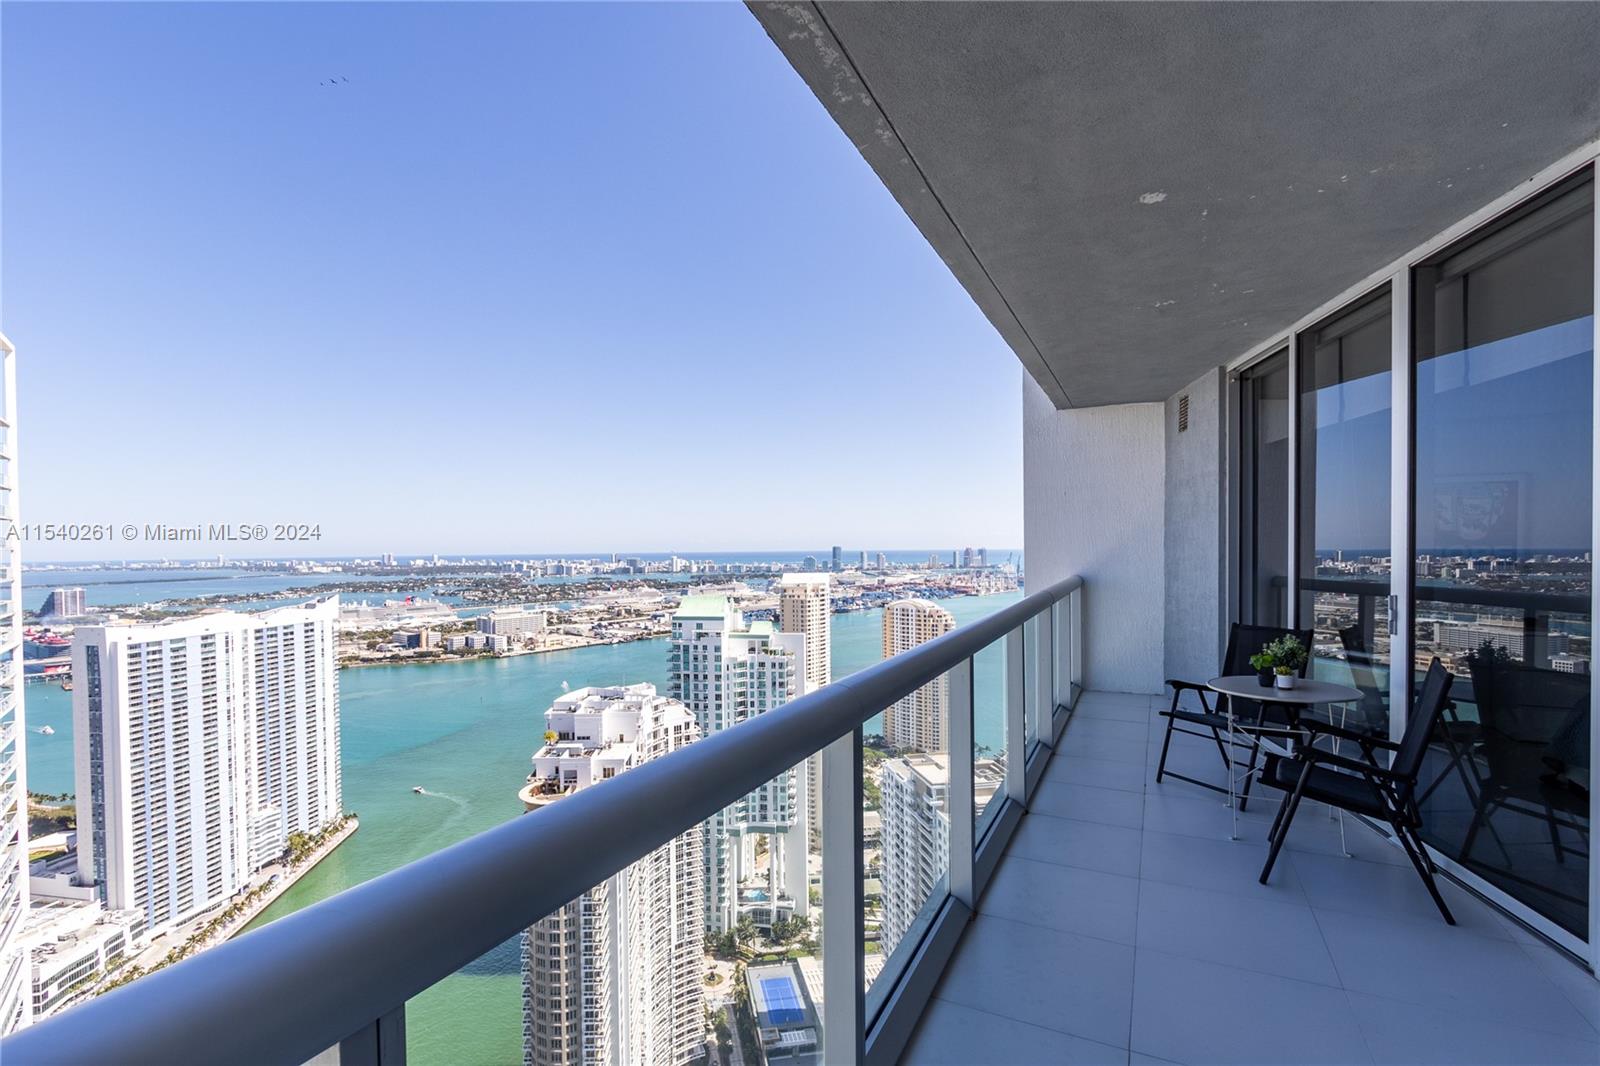 Indulge in the allure of urban living at this captivating Fully FURNISHED 1-bed. condo in the prestigious Icon Brickell. From the moment you step inside you'll be swept away by the breathtaking views and luxurious amenities that promise a lifestyle of sophistication. Waking up to the gentle glow of the Miami sunrise, sipping your morning coffee gazing over the bustling city below. Every detail has been crafted with your comfort and enjoyment in mind from the sleek modern finishes to the expansive floor-to-ceiling windows that flood the space with natural light. Whether you're lounging by the pool, unwinding in the spa, or exploring the vibrant streets of Brickell, every moment spent here is sure to evoke a sense of excitement and joy. Don't just imagine your dream home – make it a reality.